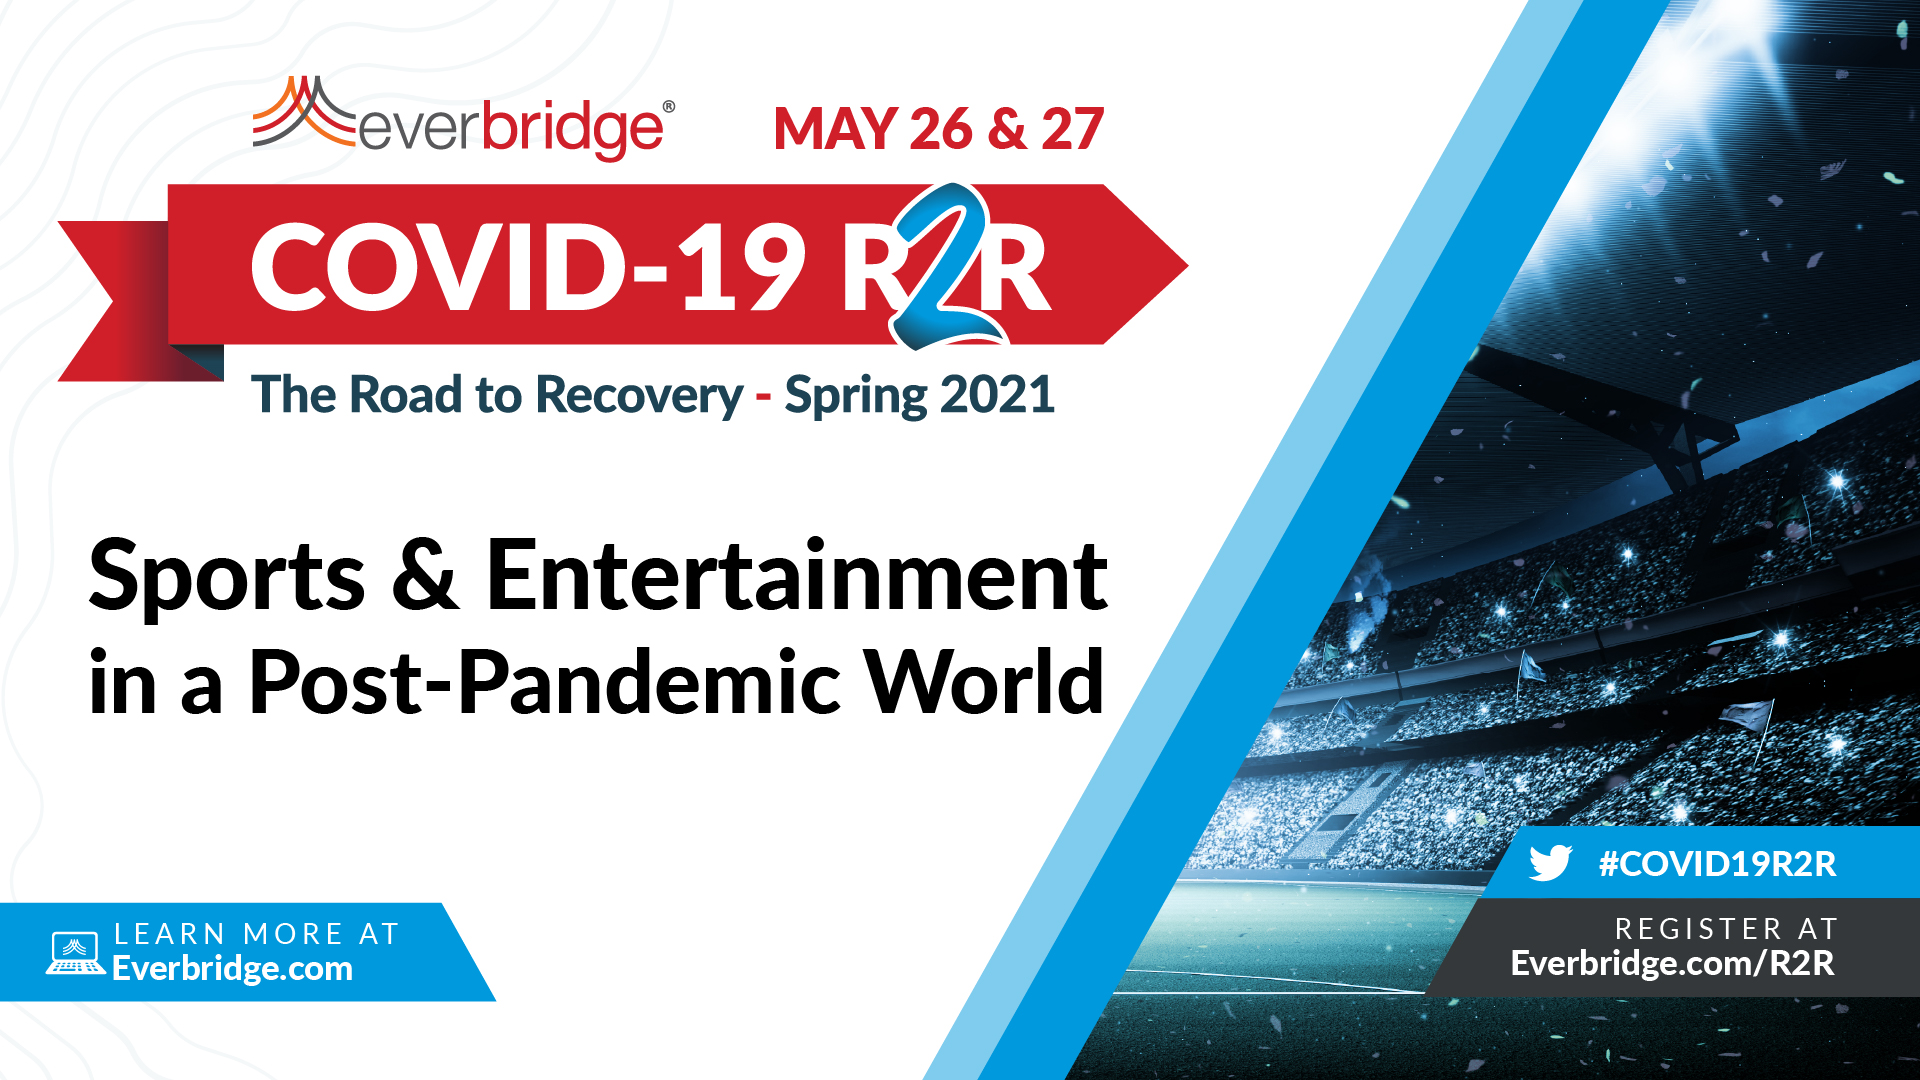 Everbridge COVID-19 Road to Recovery (R2R) Executive Summit to Feature Top Major League Baseball (MLB), Arsenal Football Club, and Dutch Olympic Committee Leaders Insights About the Future of Sports in a Post-Pandemic